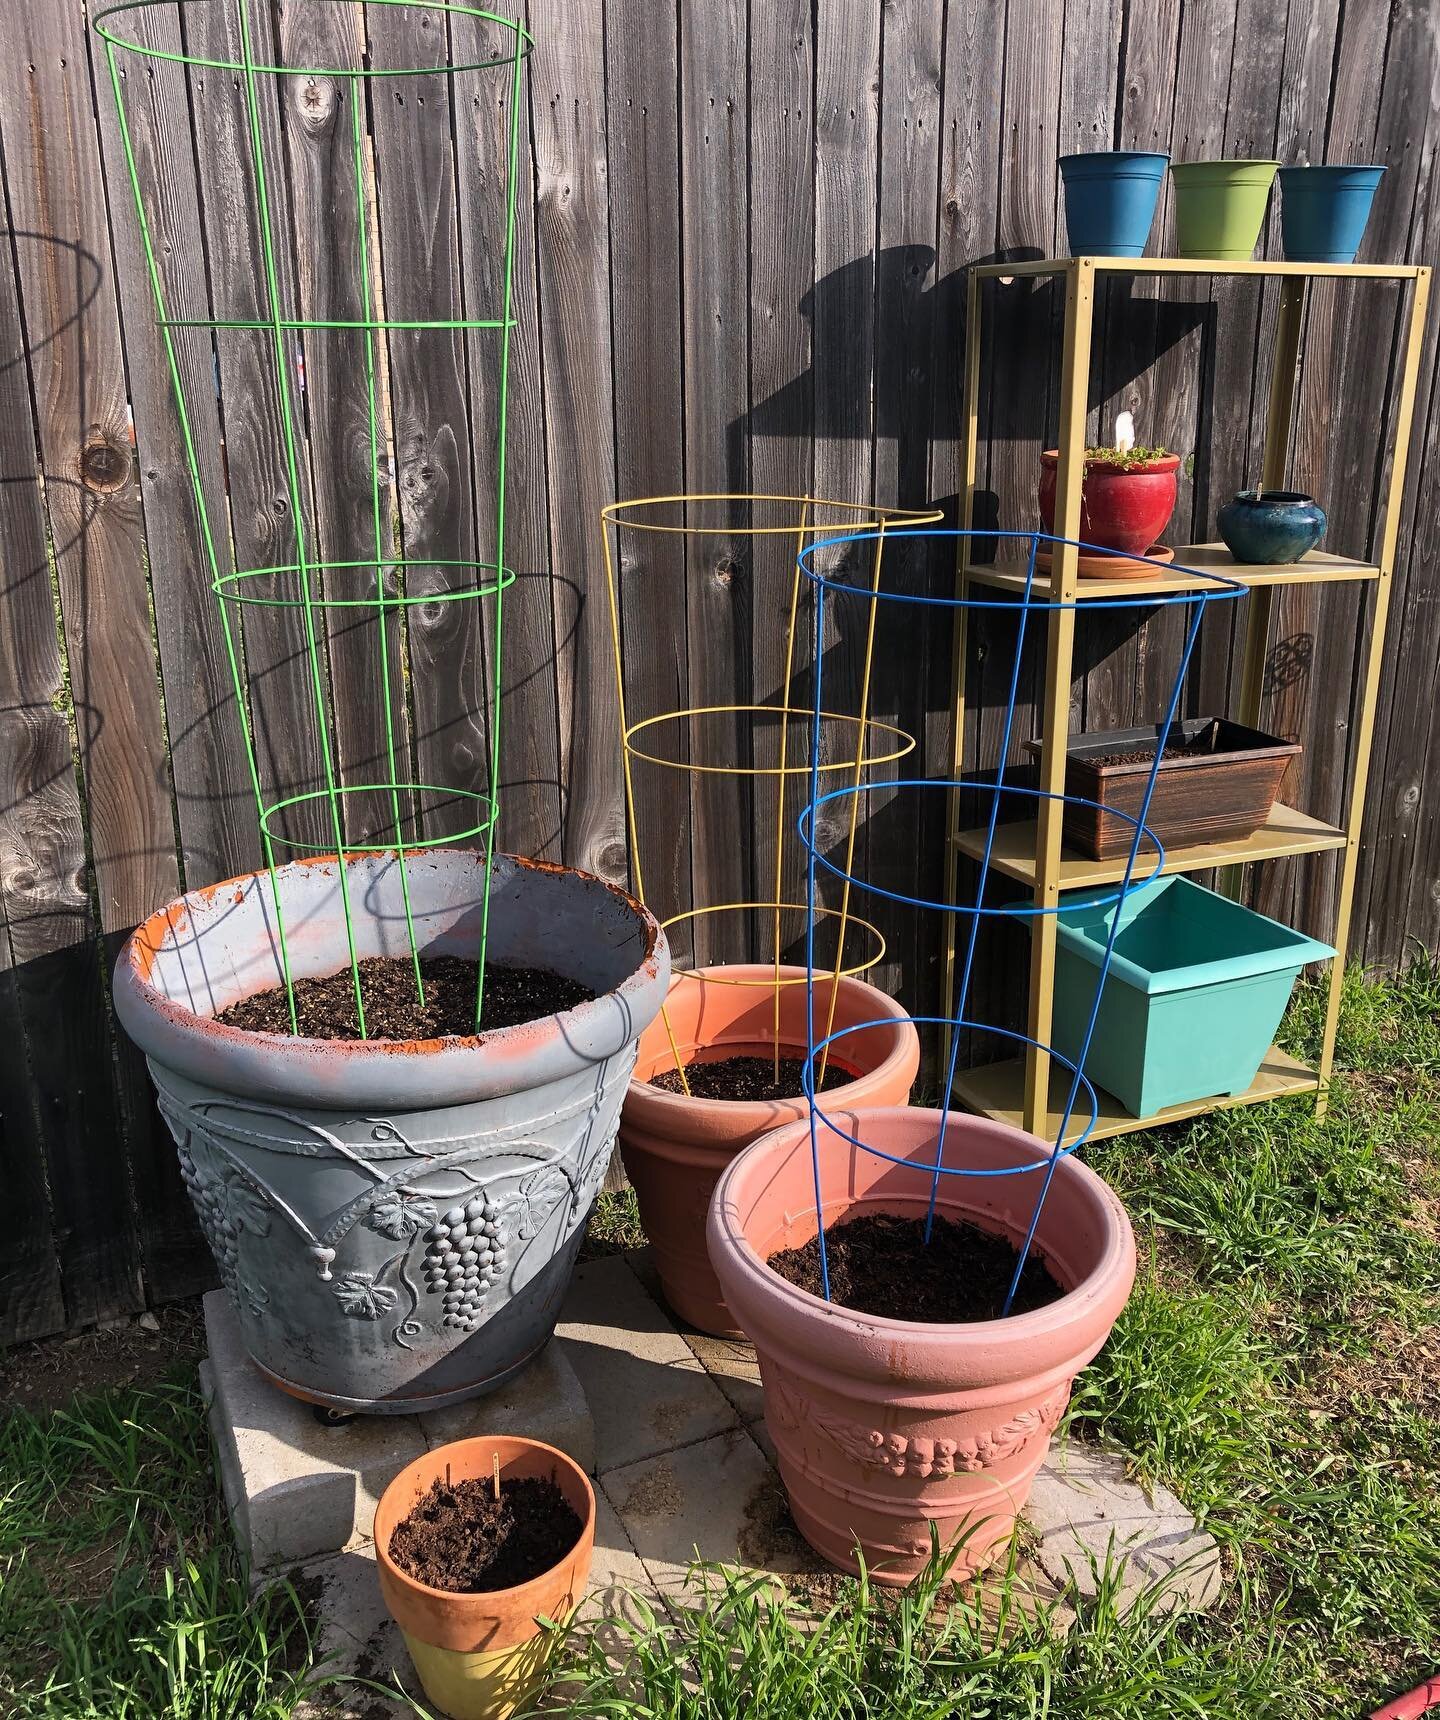 I think spring is finally settling into place here in Austin! Miayah and I have taken up container gardening and have planted a myriad of vegetables. We have English peas, micro greens, and all sorts of mint, among other things. Join us on our blog -